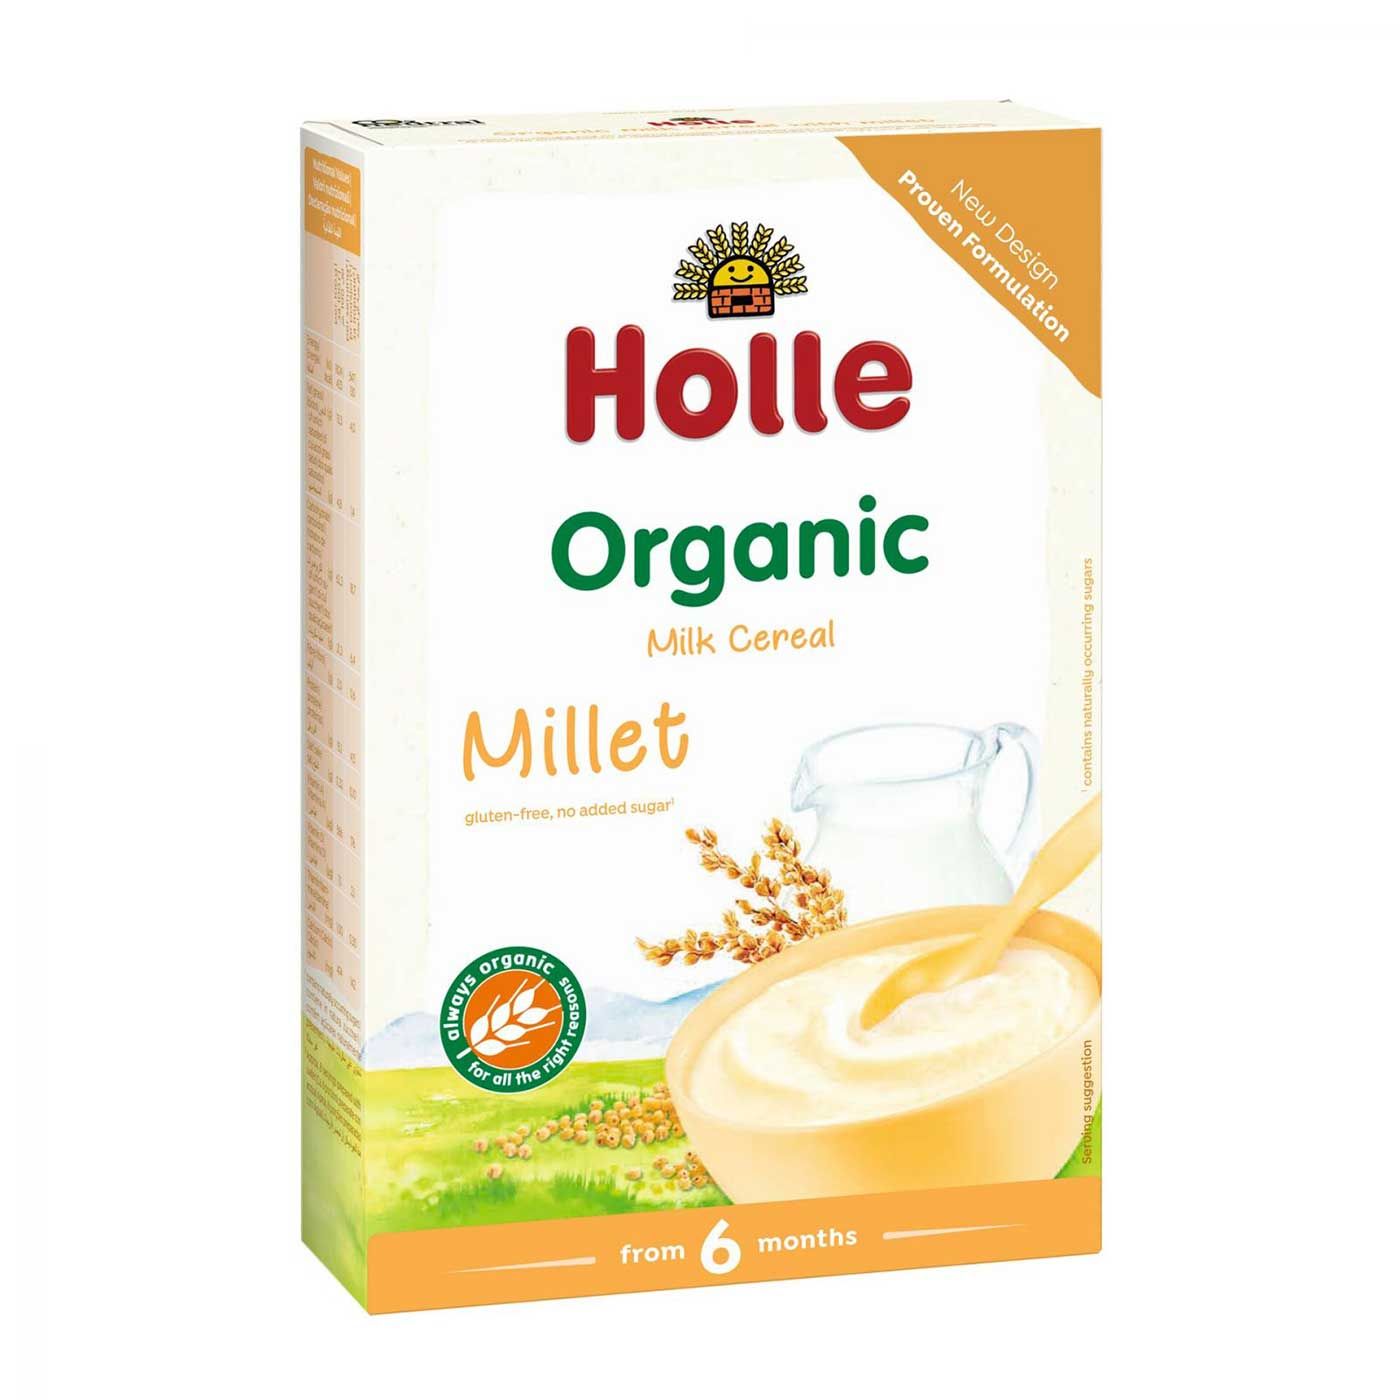 Holle Organic Milk Cereal with Millet 250g - 2